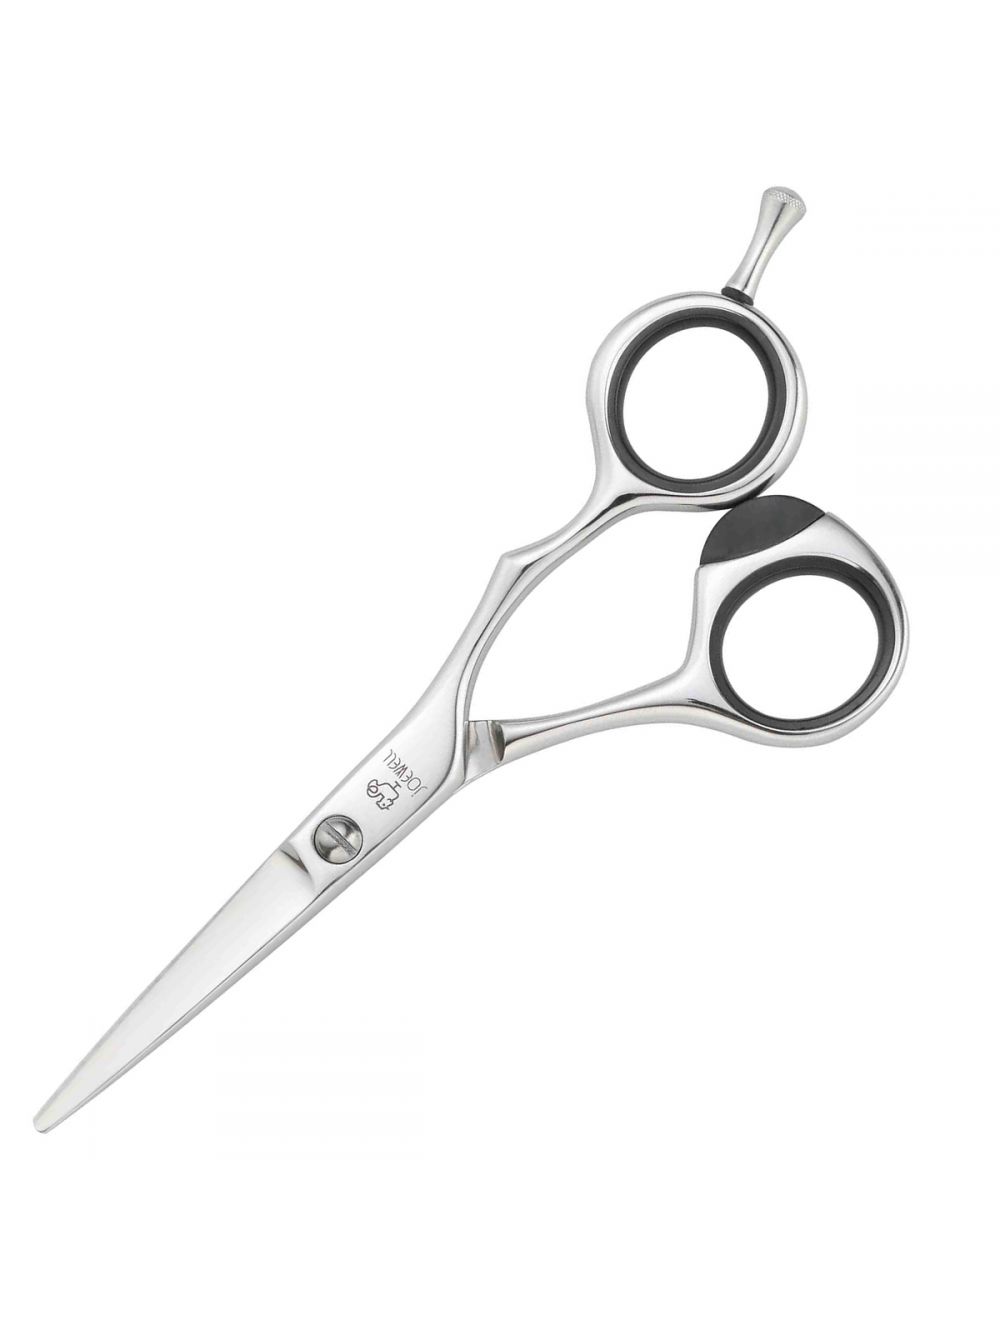 Joewell X Series Hairdressing Scissors - Ultimate Hair and Beauty